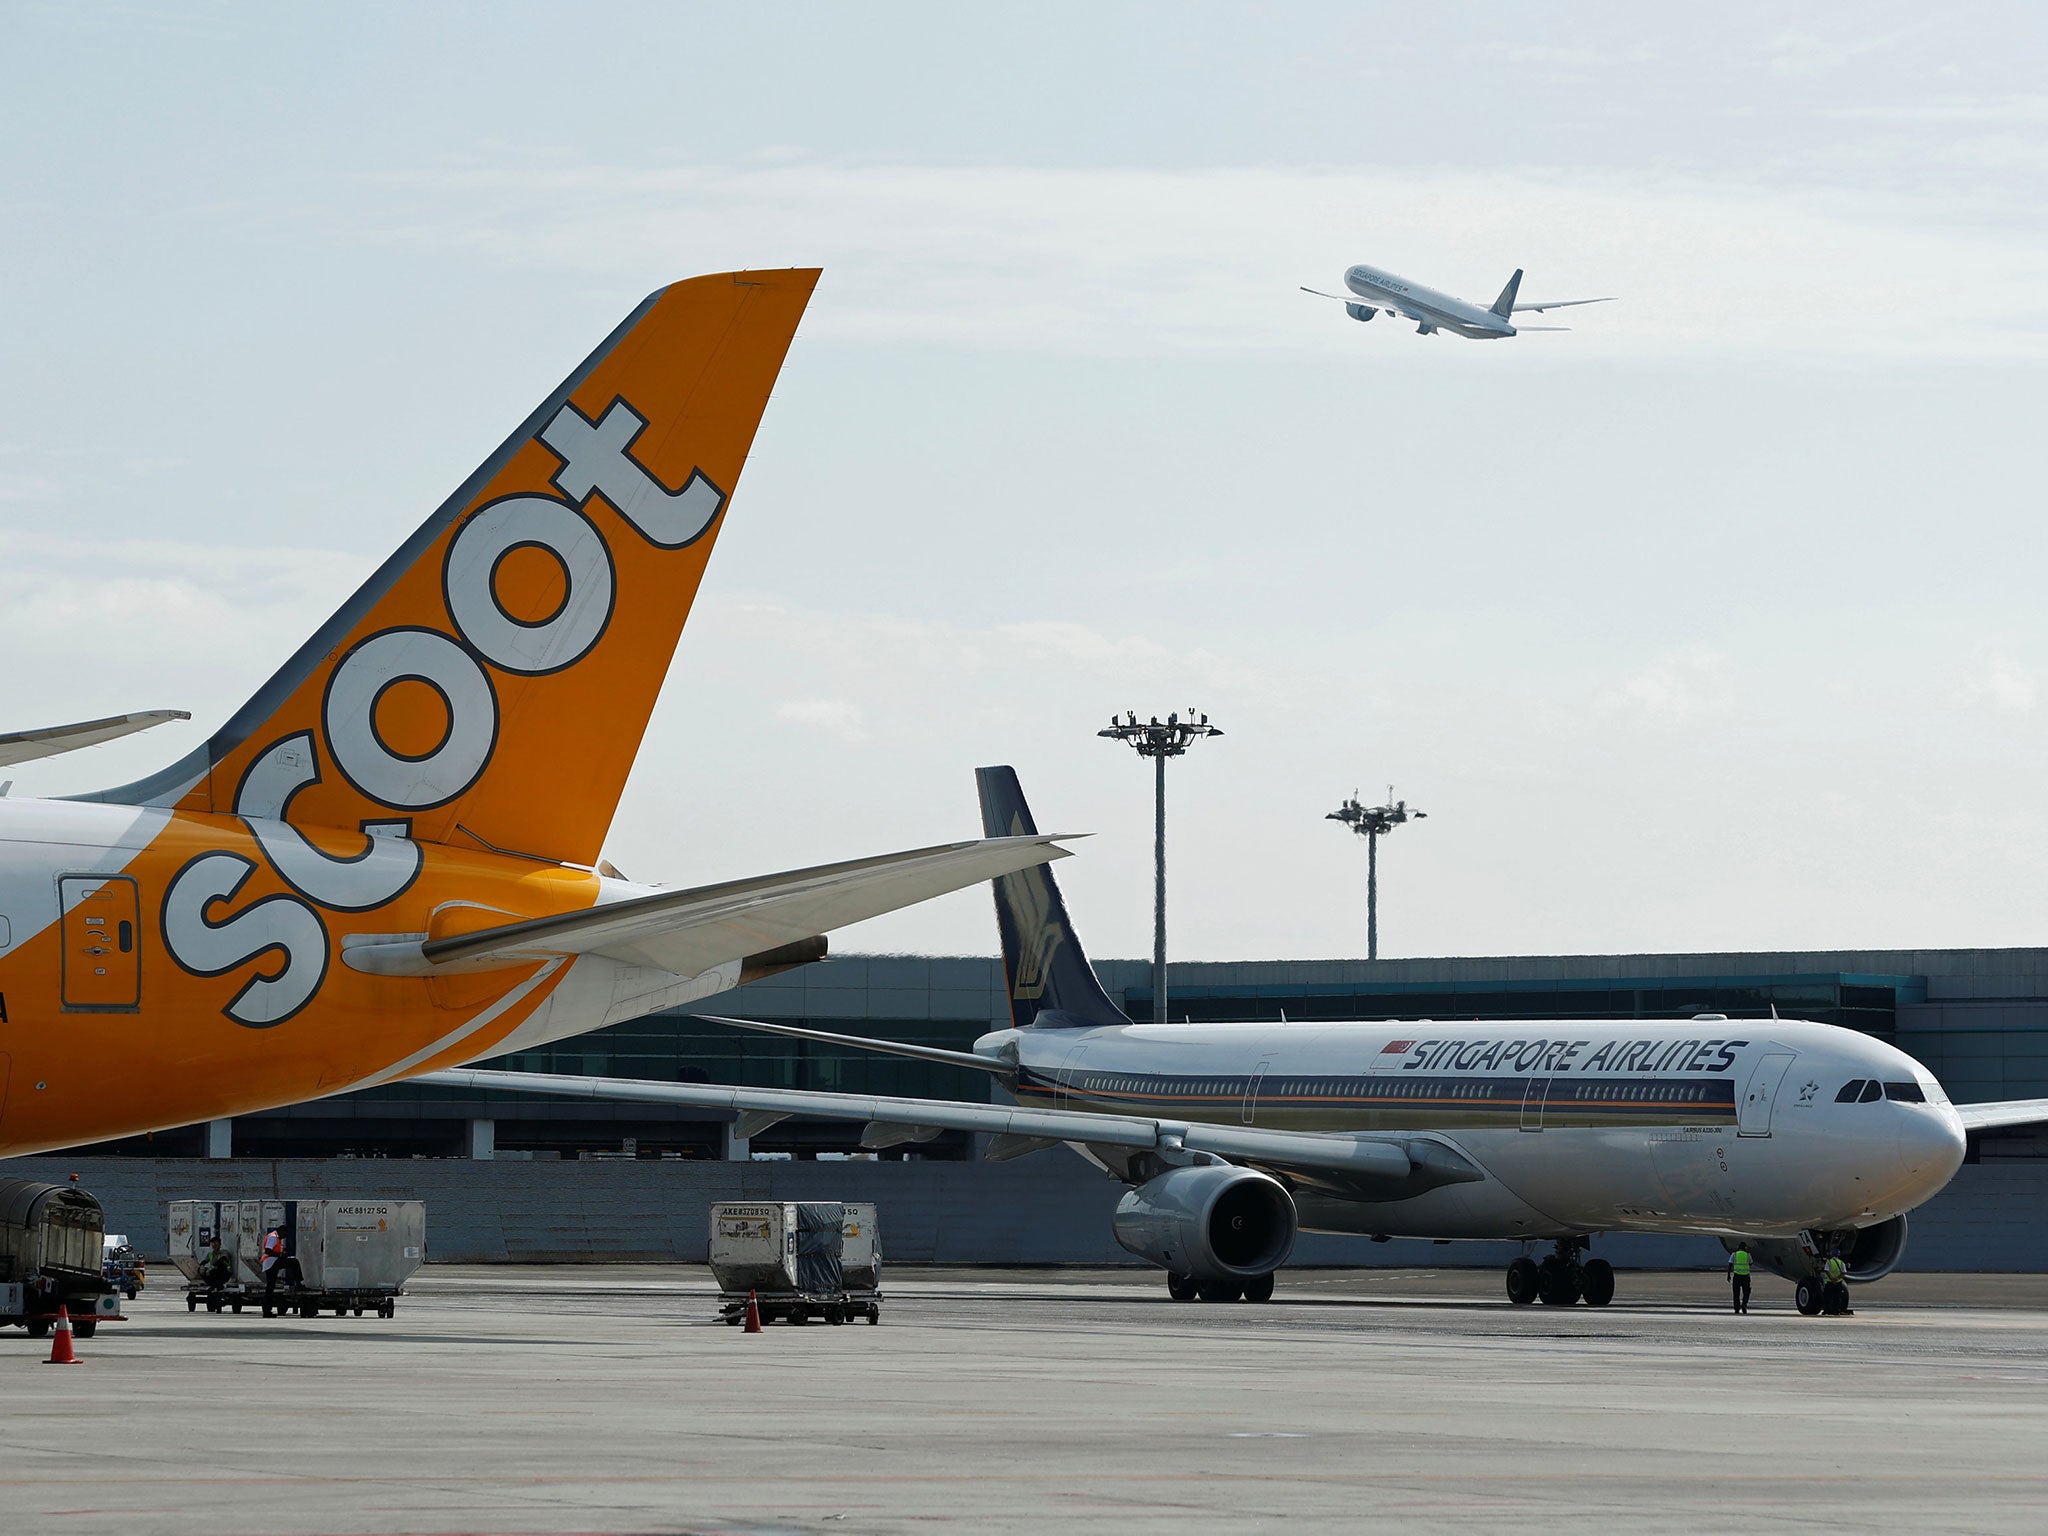 Scoot is the budget subsidiary of Singapore Airlines